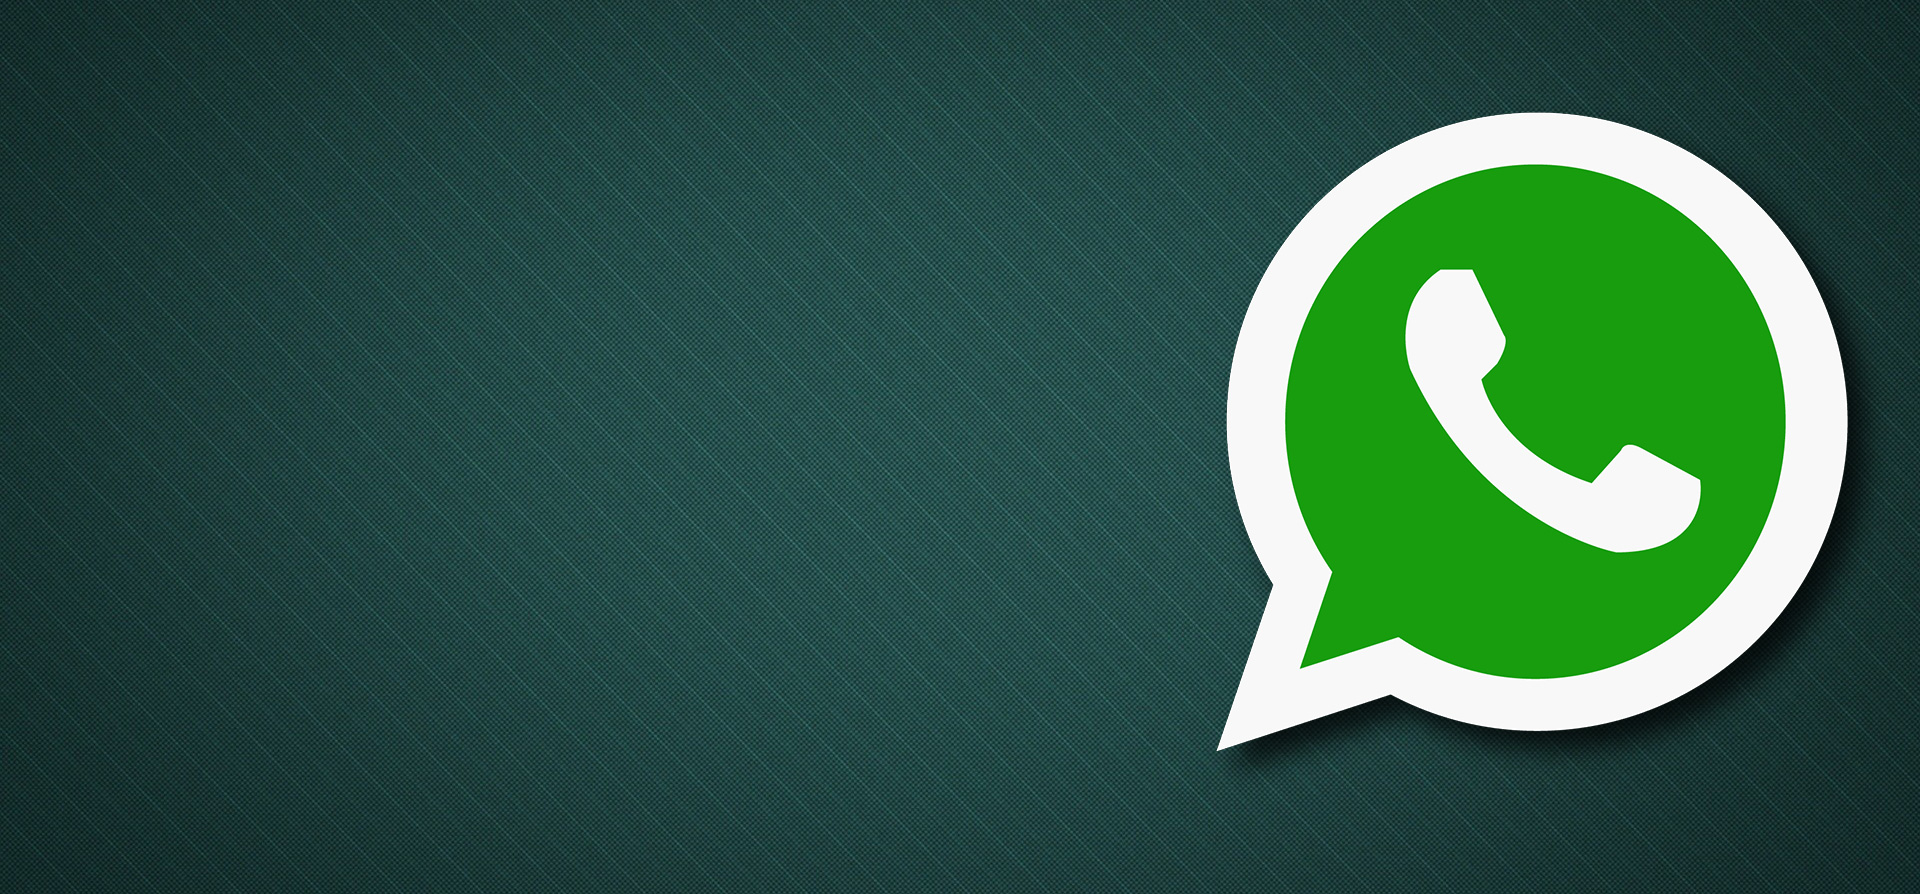 WhatsApp Compatible smartphones: Is your smartphone smart enough for WhatsApp? Find out